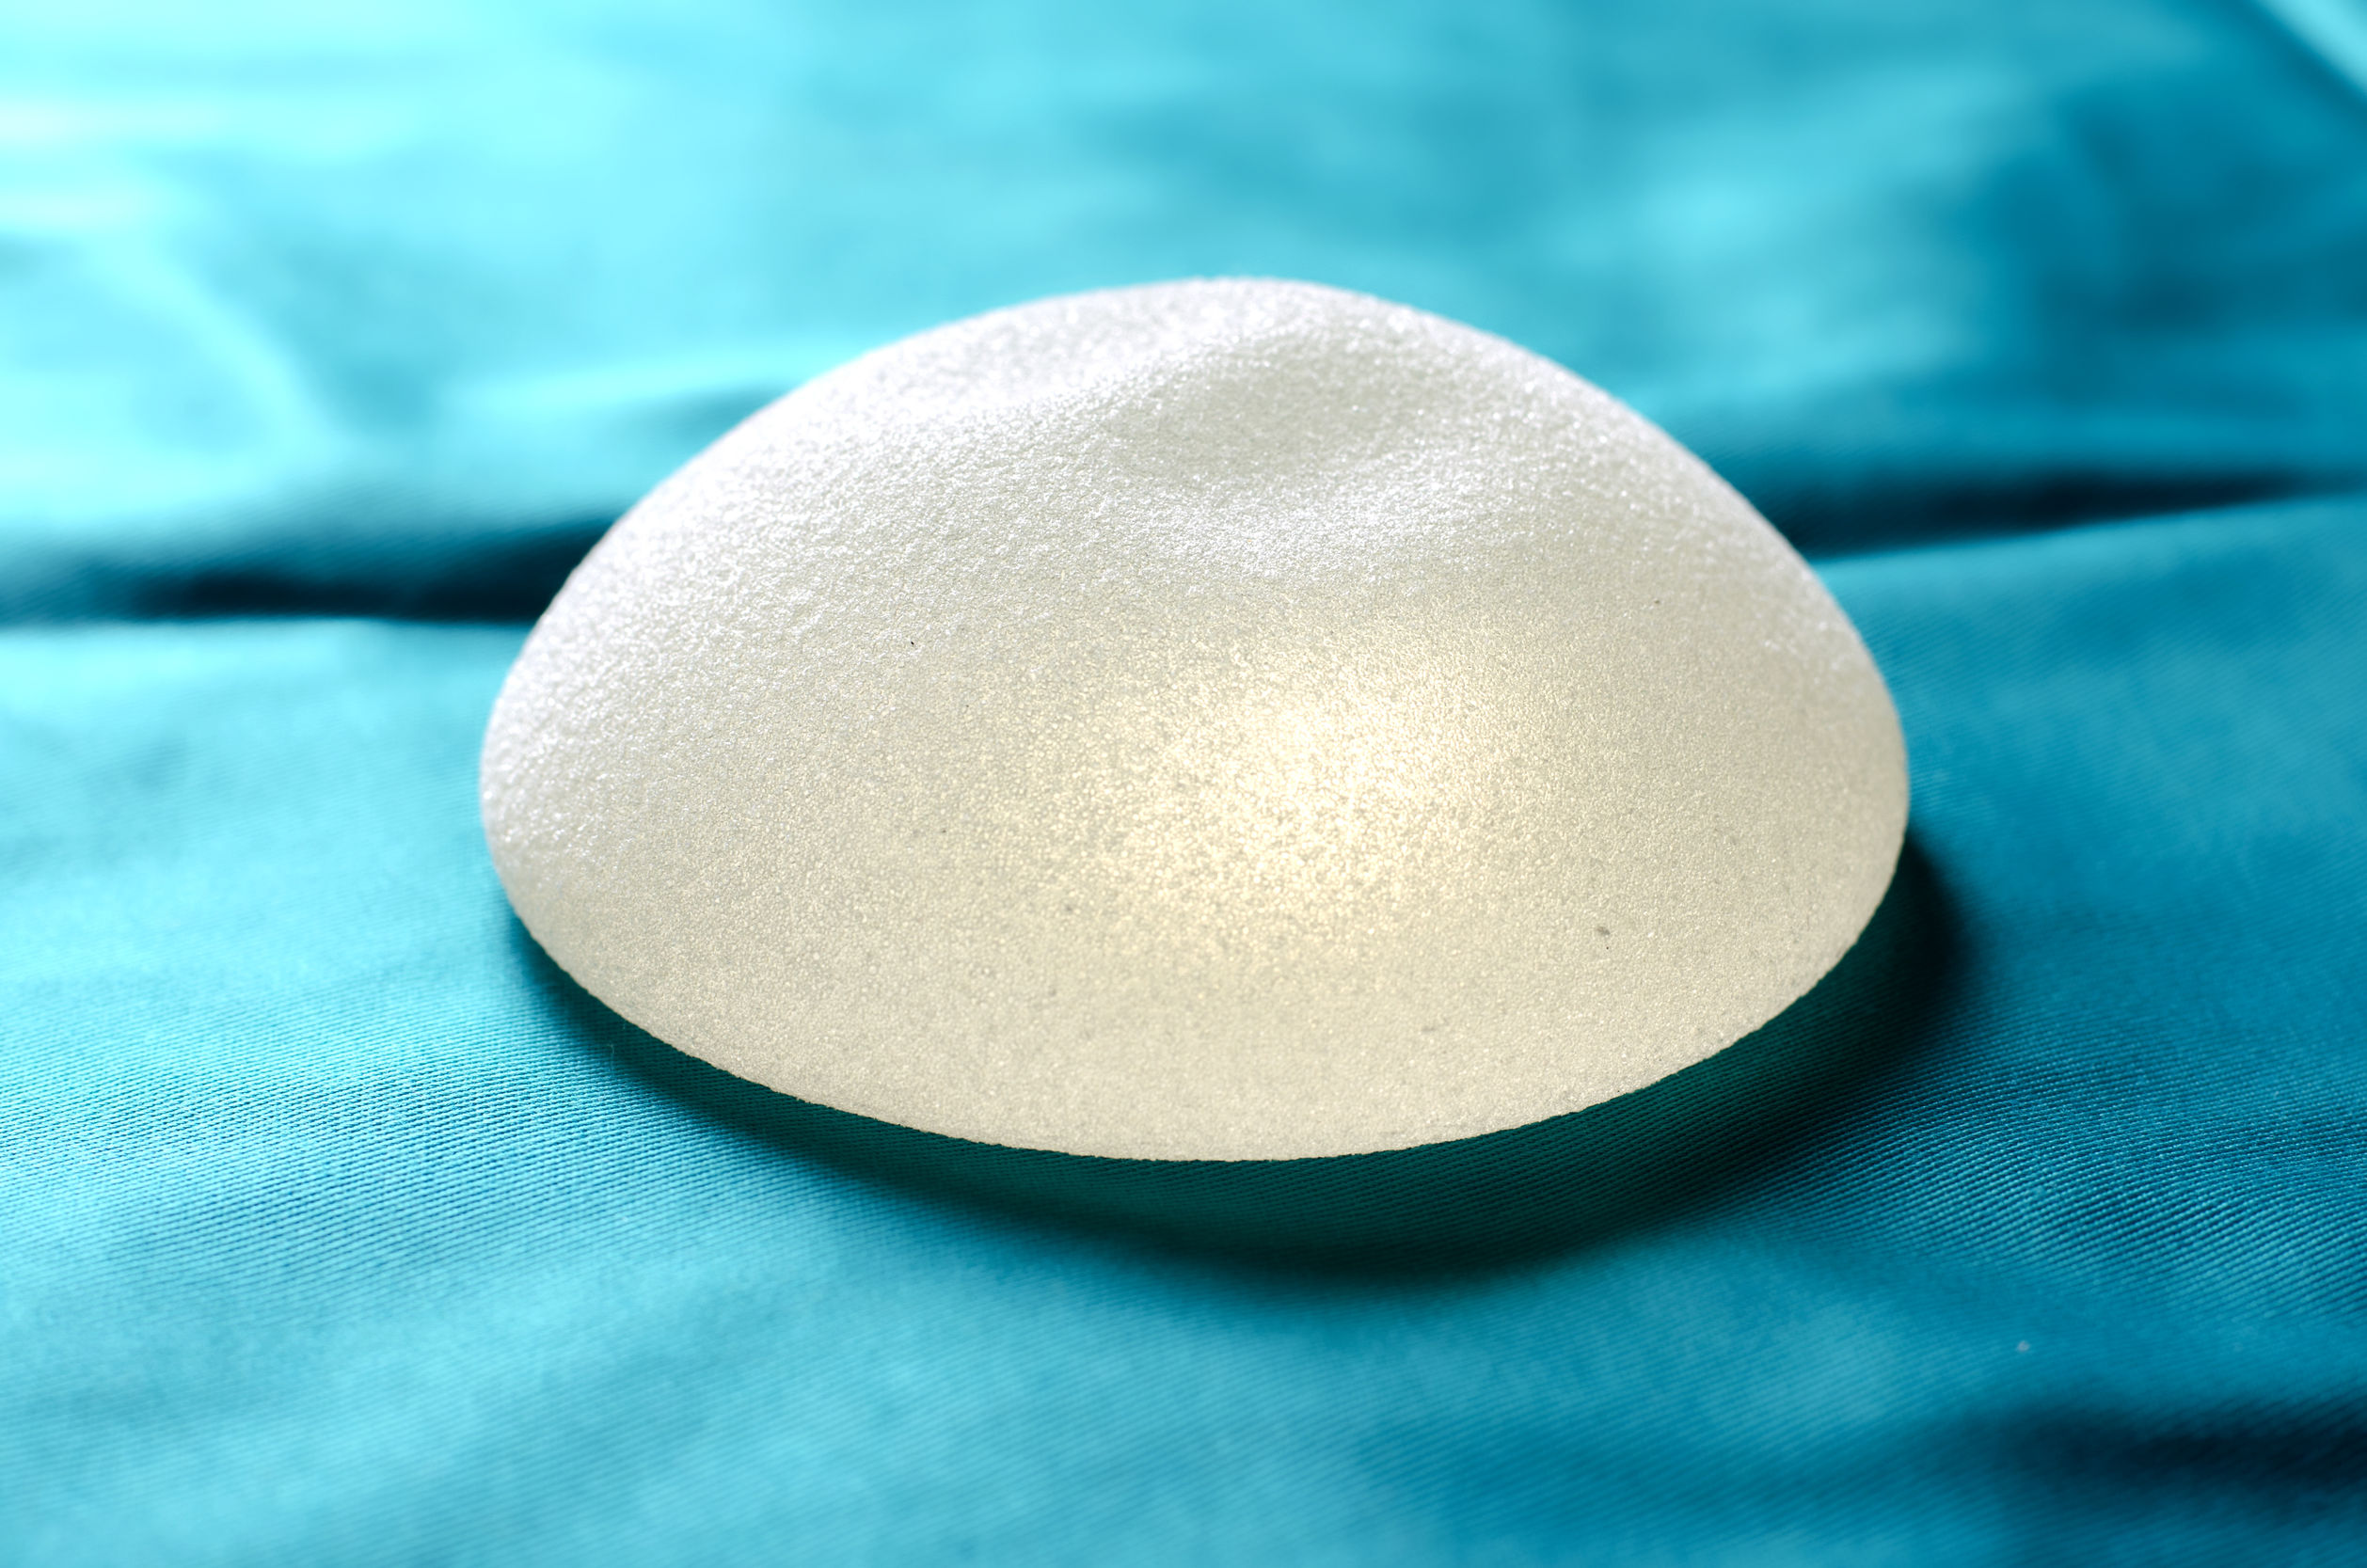 Dr. Finger offers Rapid Recovery Breast Augmentation and routinely uses silicone implants